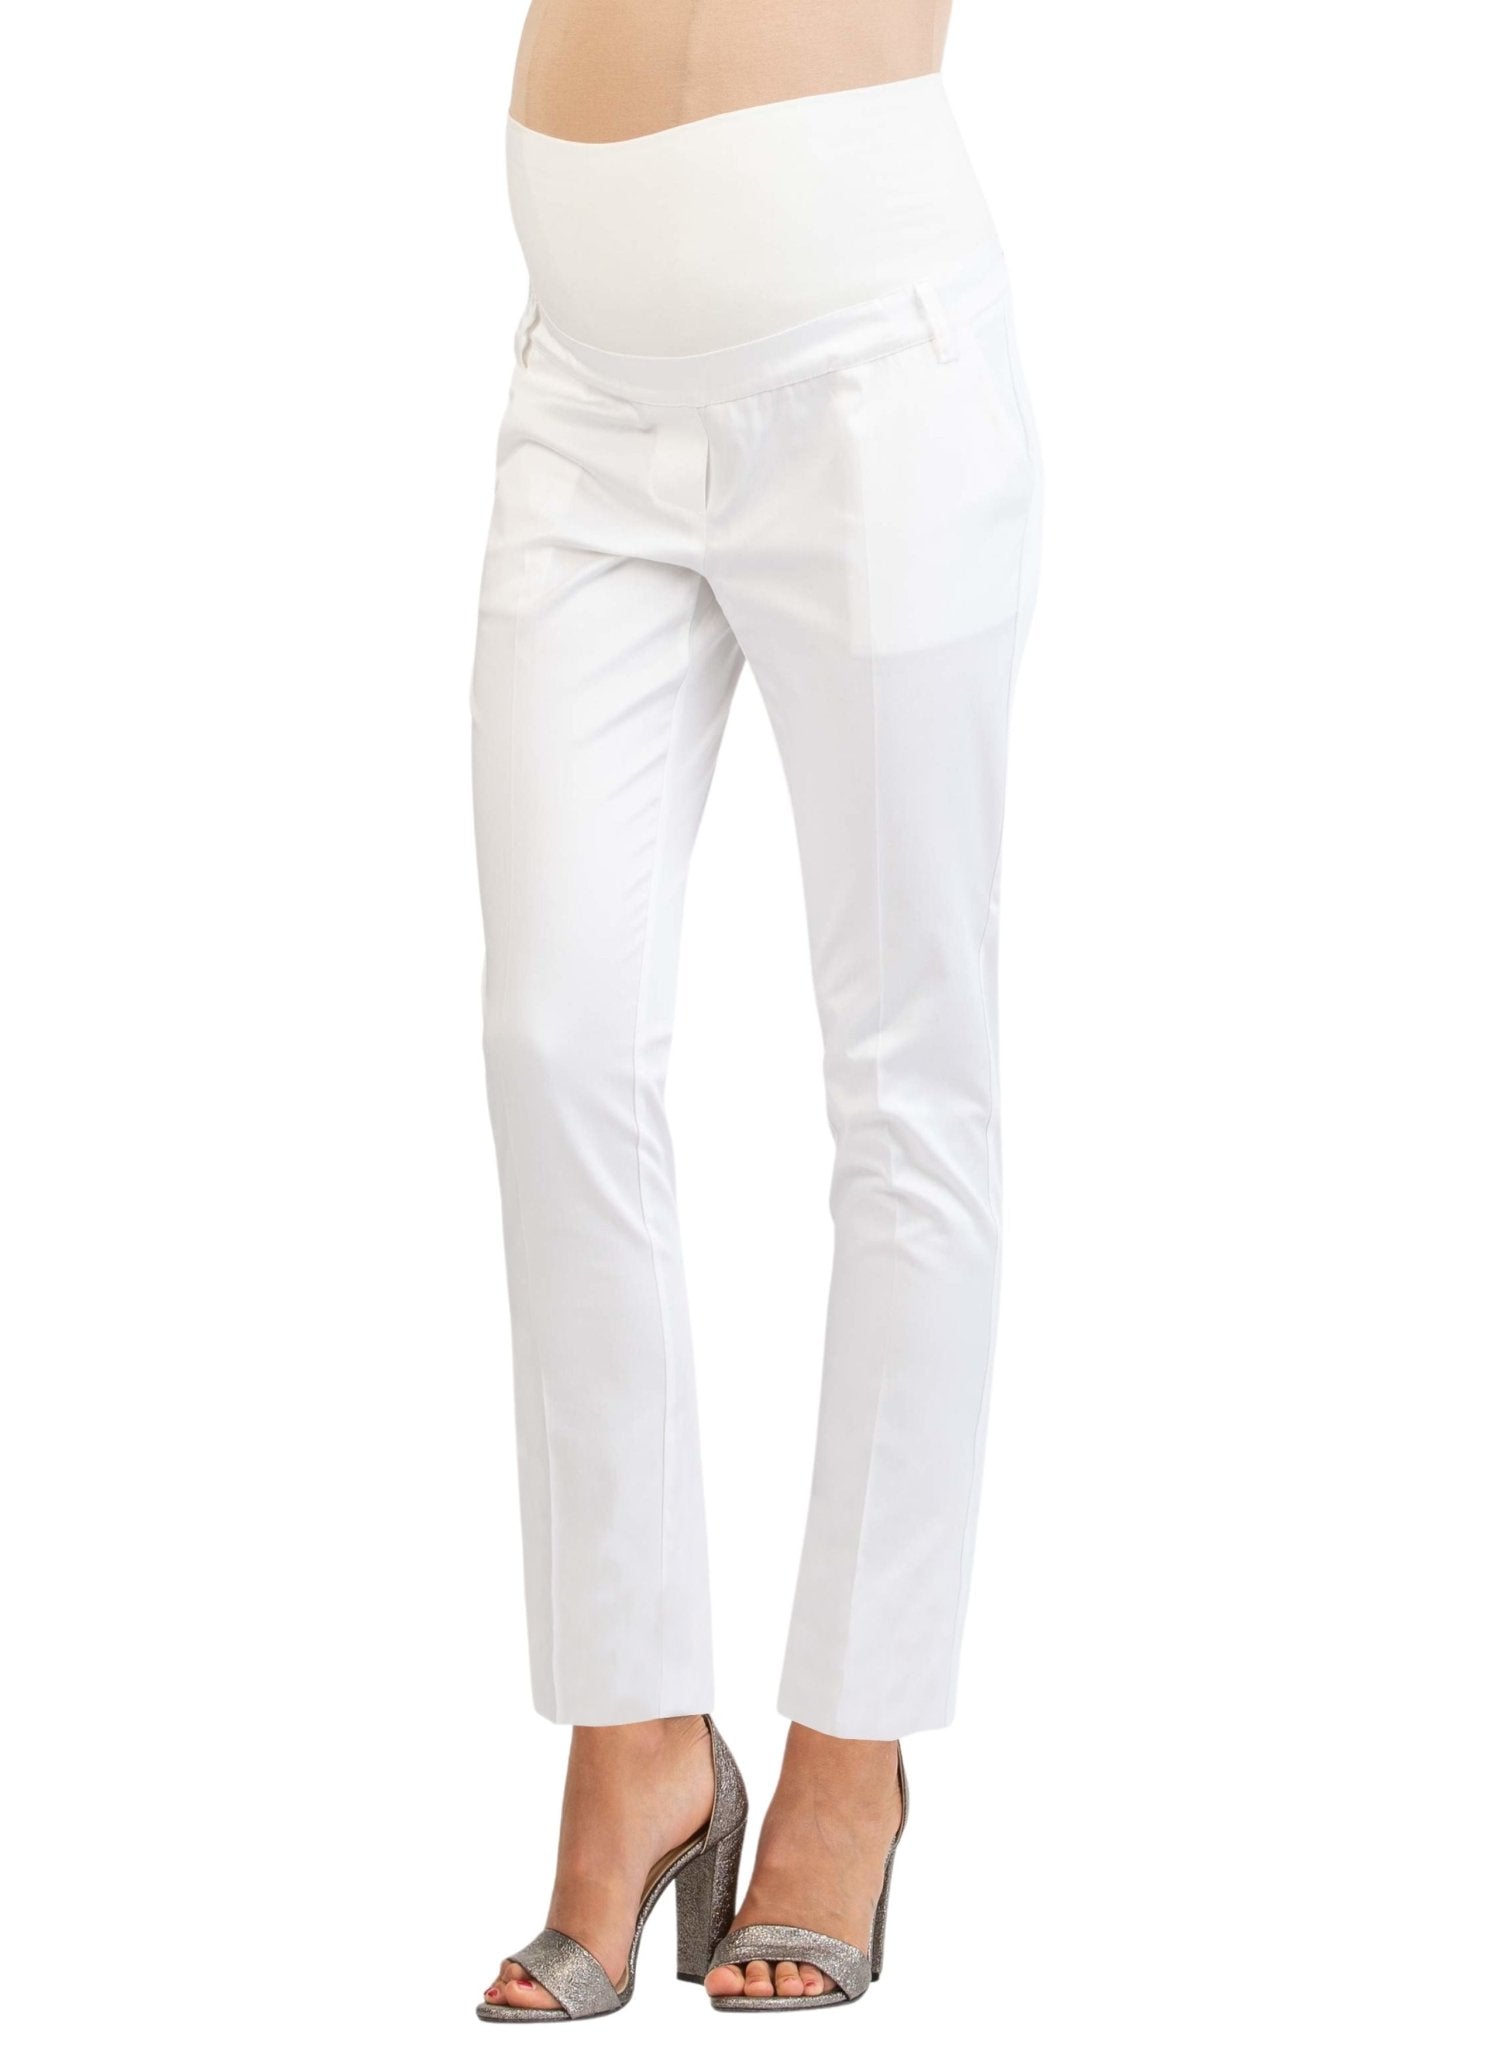 Straight Leg Tailored Maternity Trouser - White - Mums and Bumps